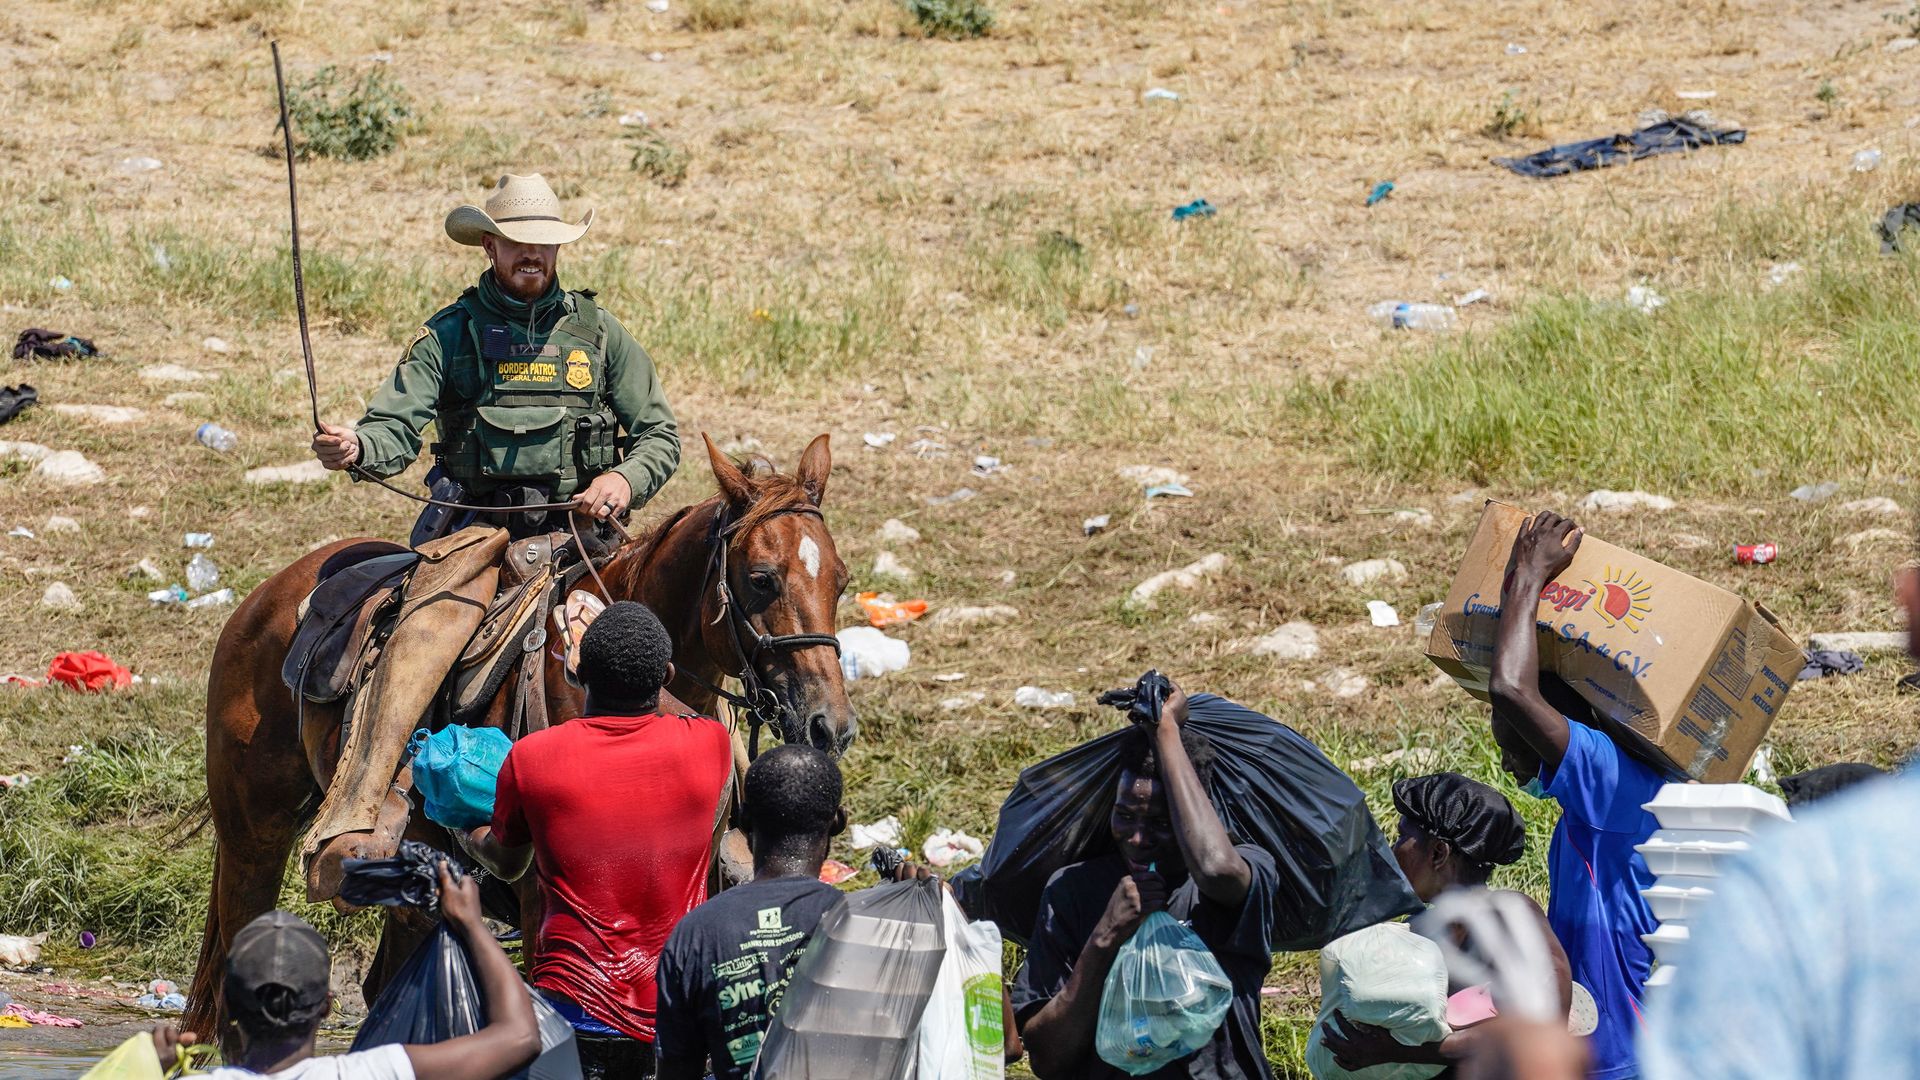 Photo of a Border Patrol agent on a horse swinging his whip as he faces a group of Haitian migrants waist deep in the Rio Grande River